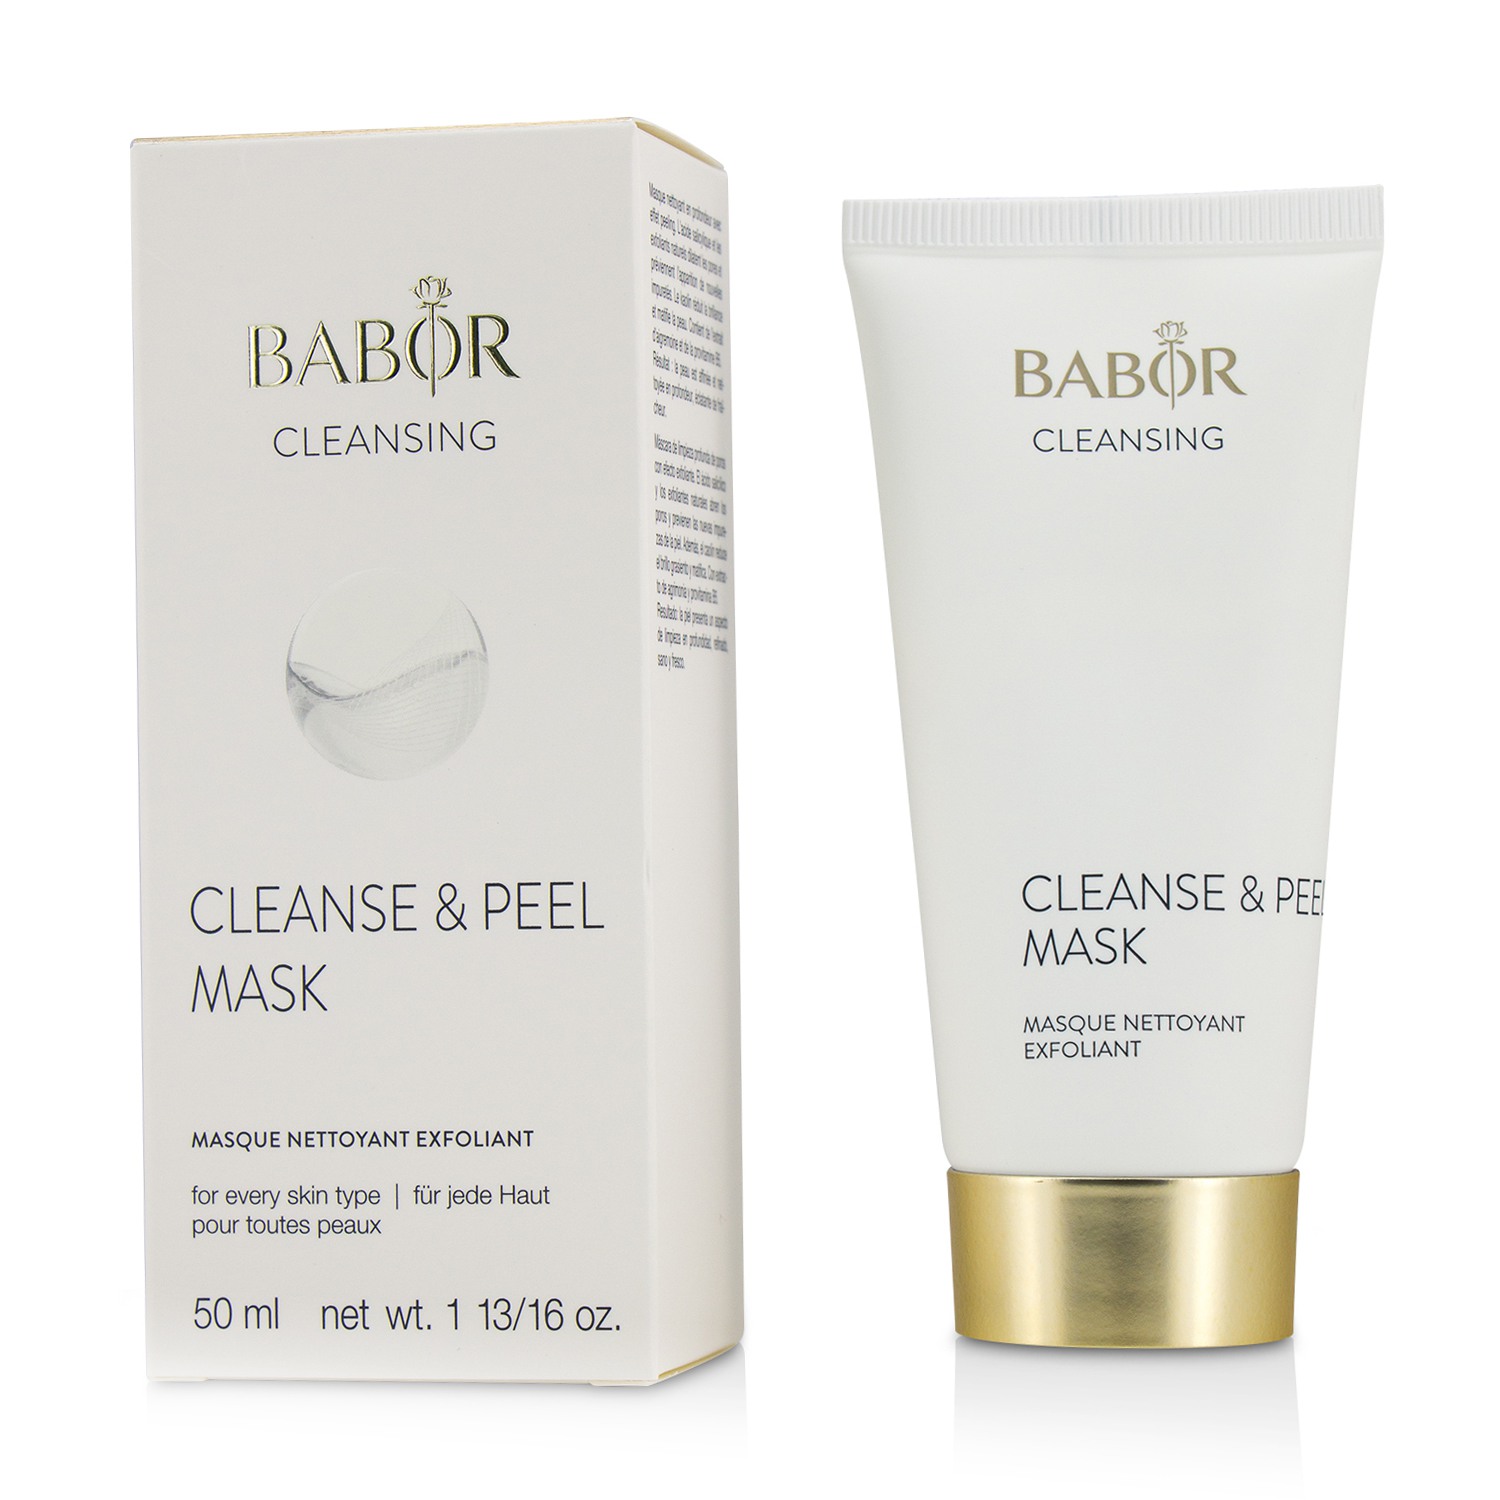 CLEANSING Cleanse & Peel Mask Babor Image